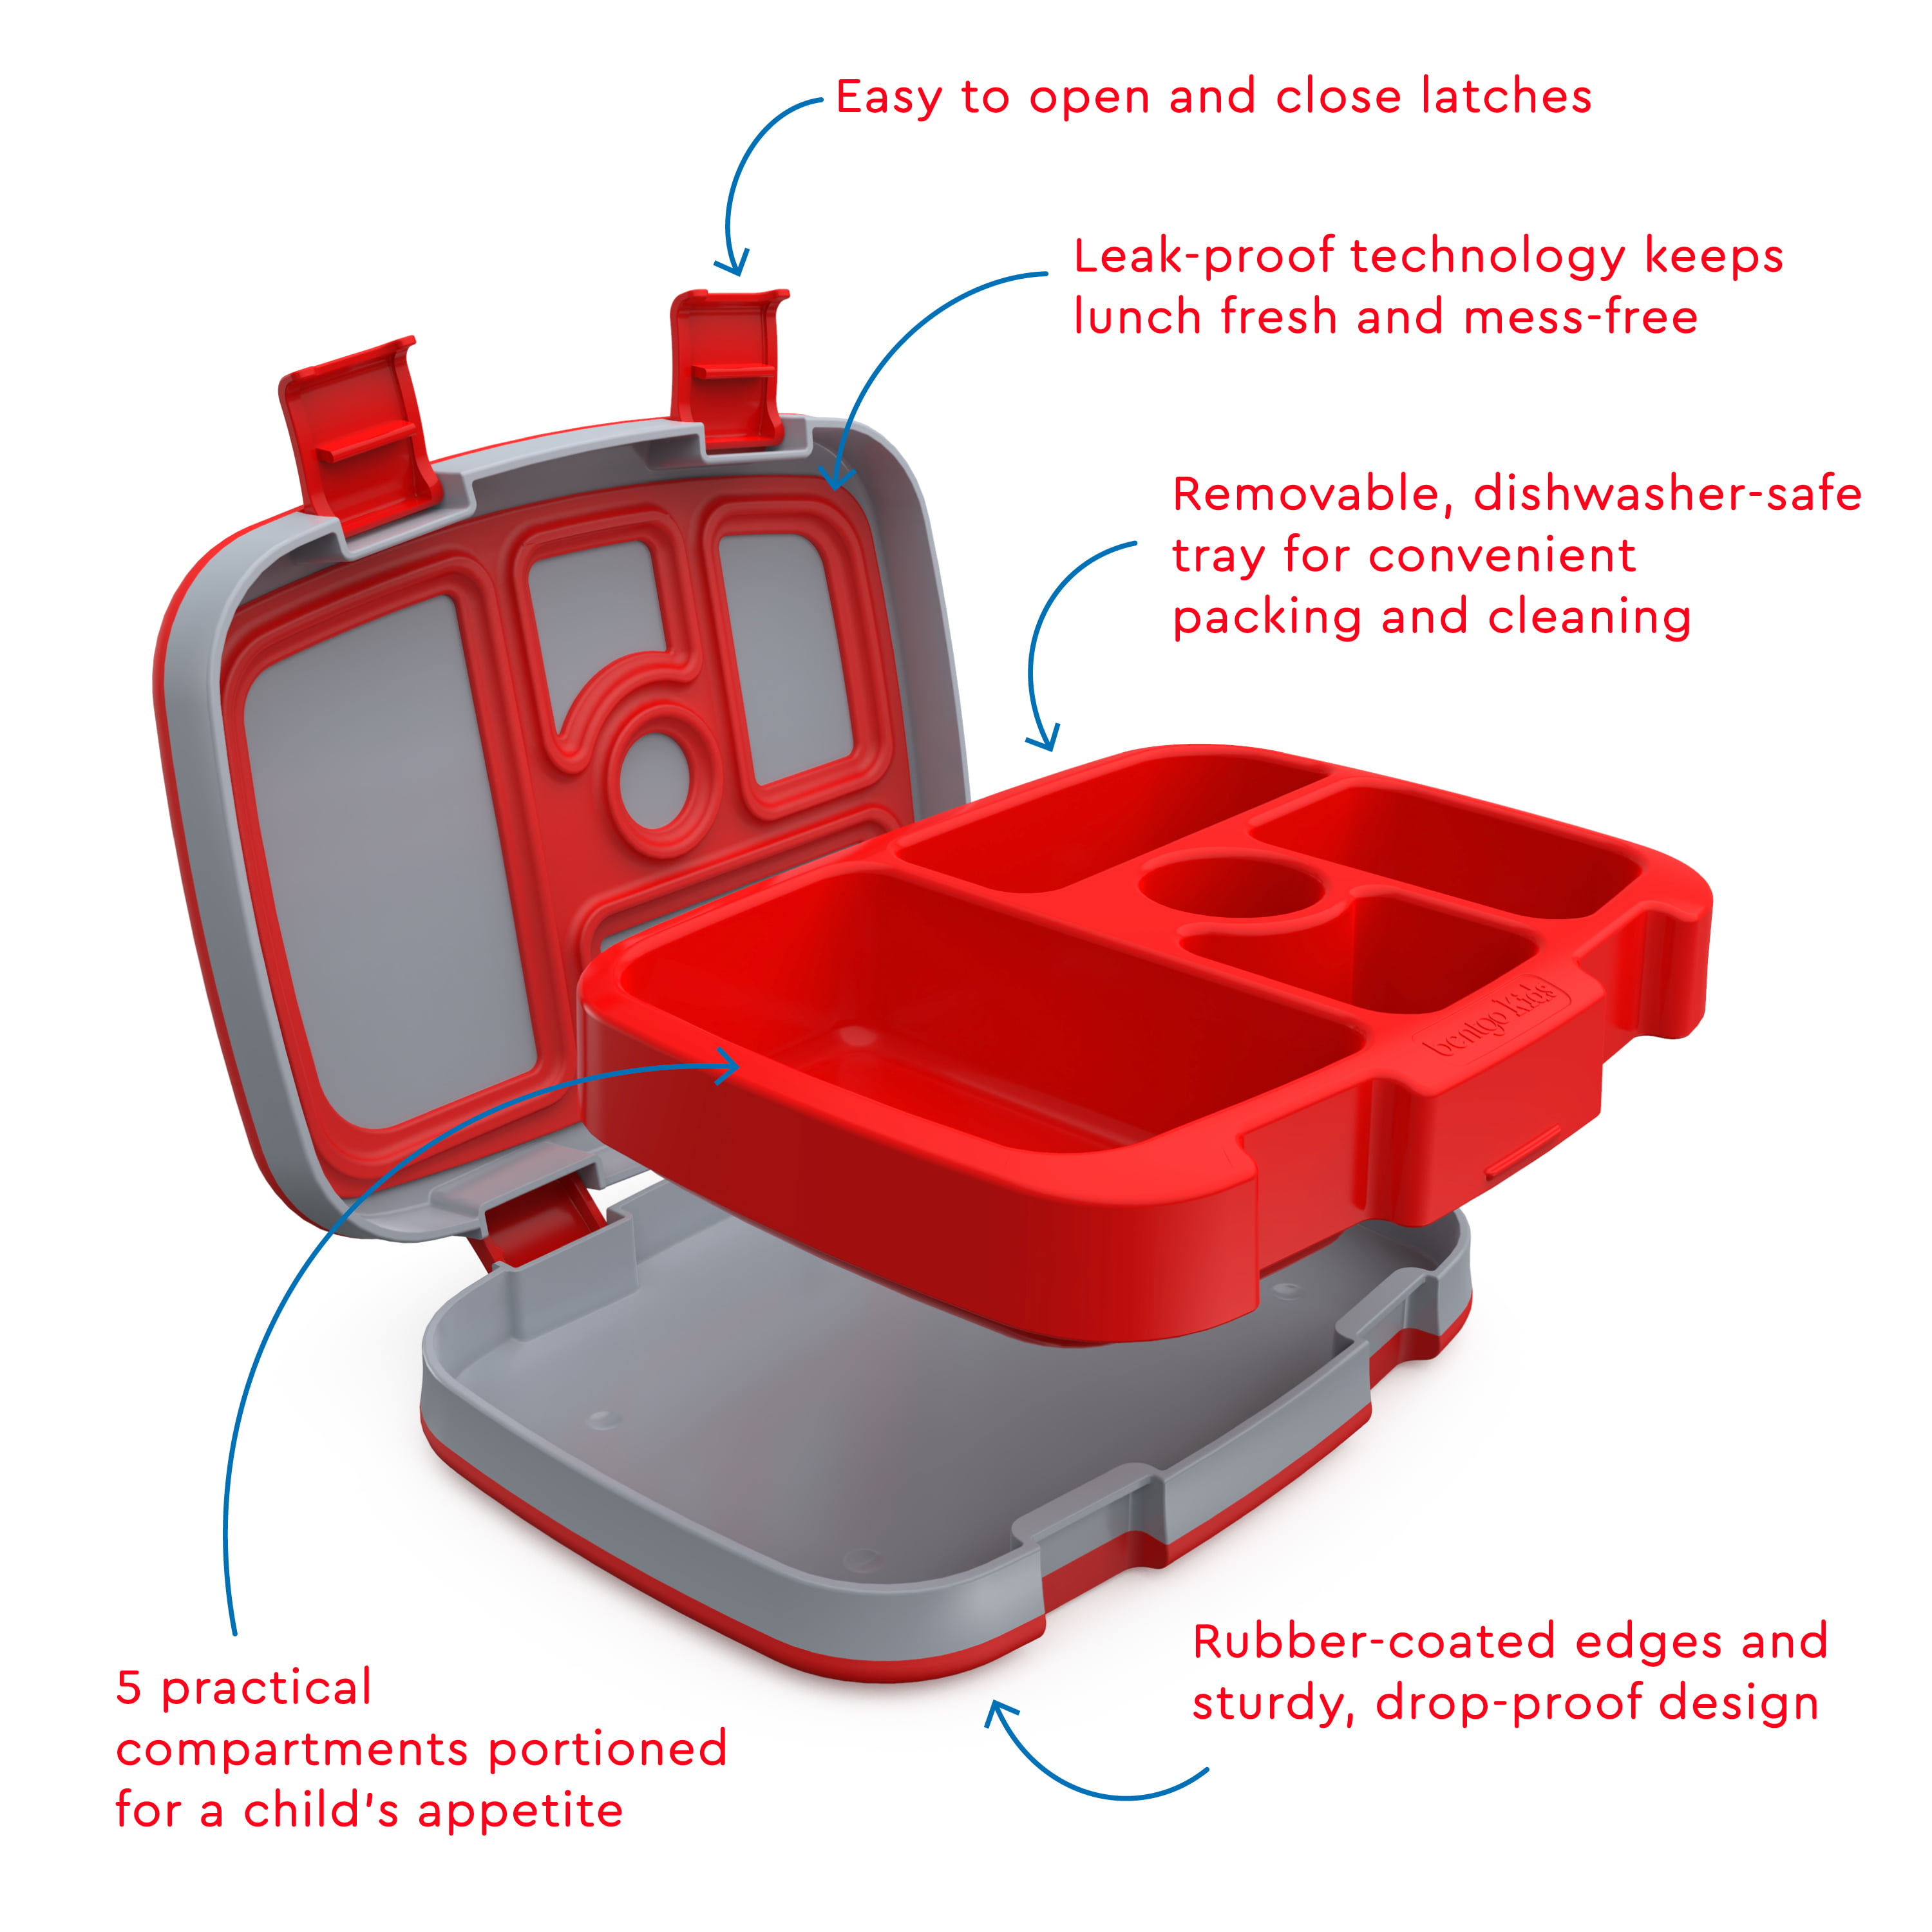 Bentgo Pop is the durable, leak-proof lunch solution with a